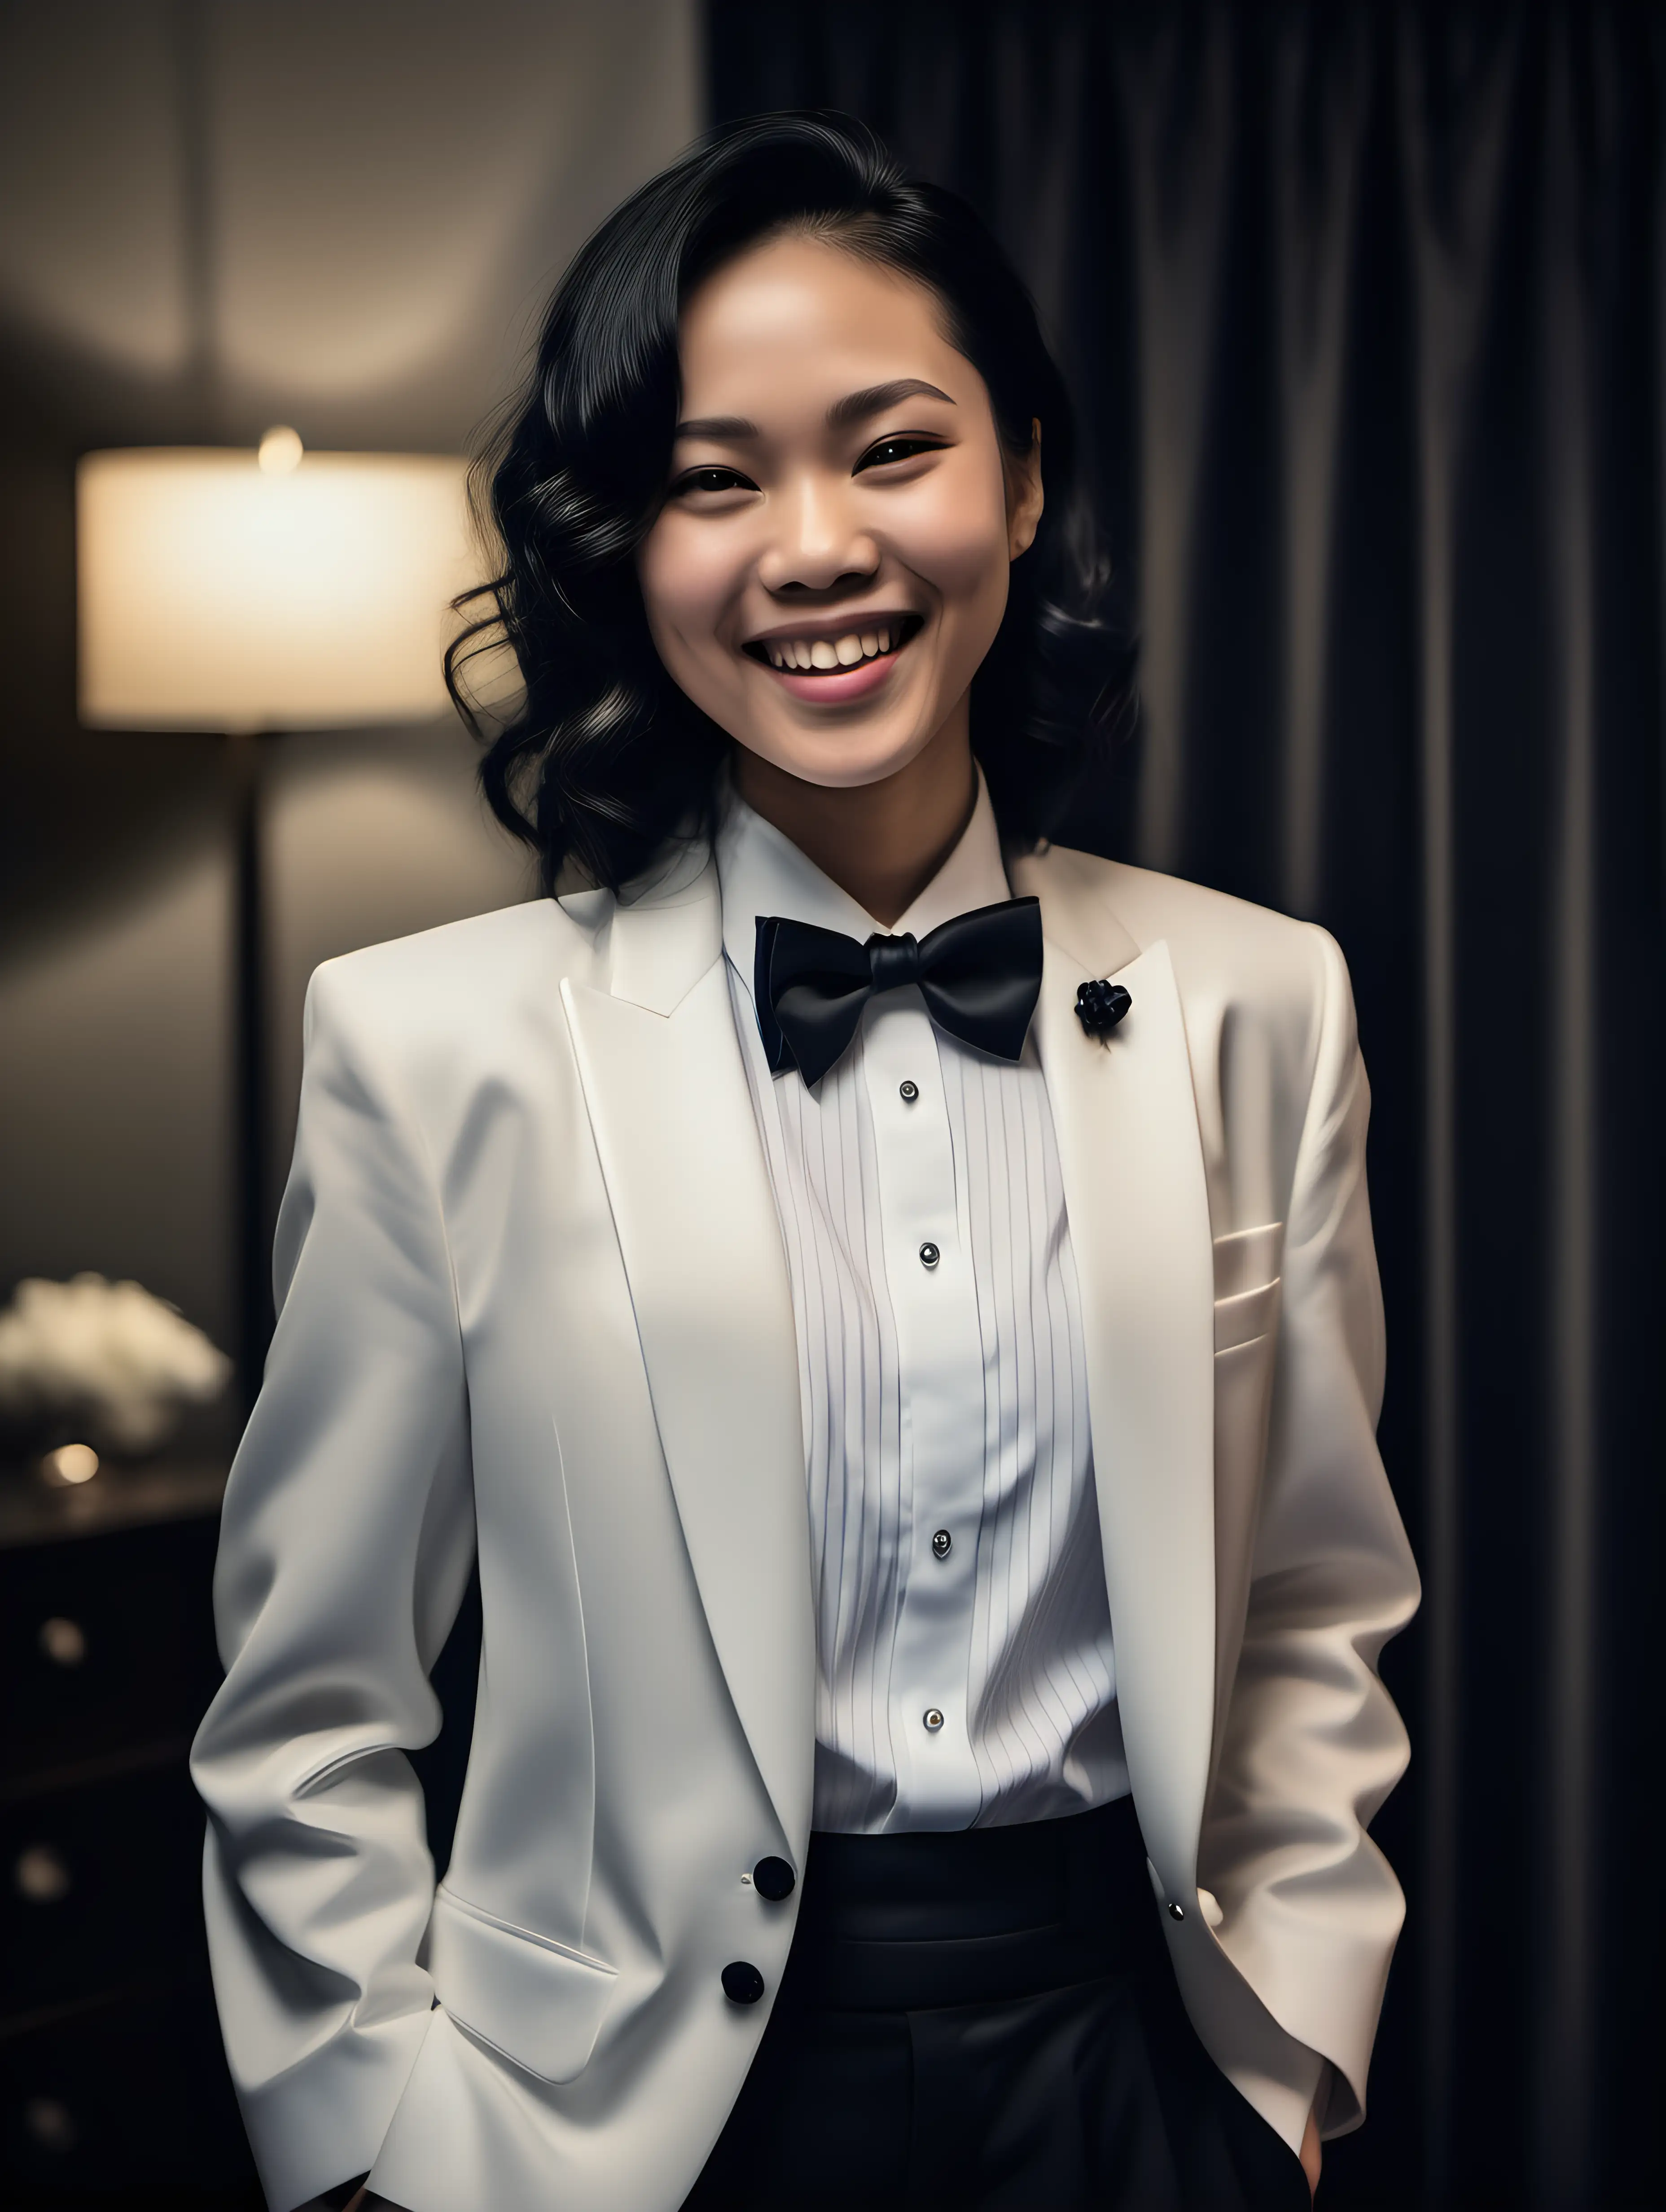 Elegant-Chinese-Woman-in-Black-Tuxedo-Smiling-in-Nighttime-Ambiance